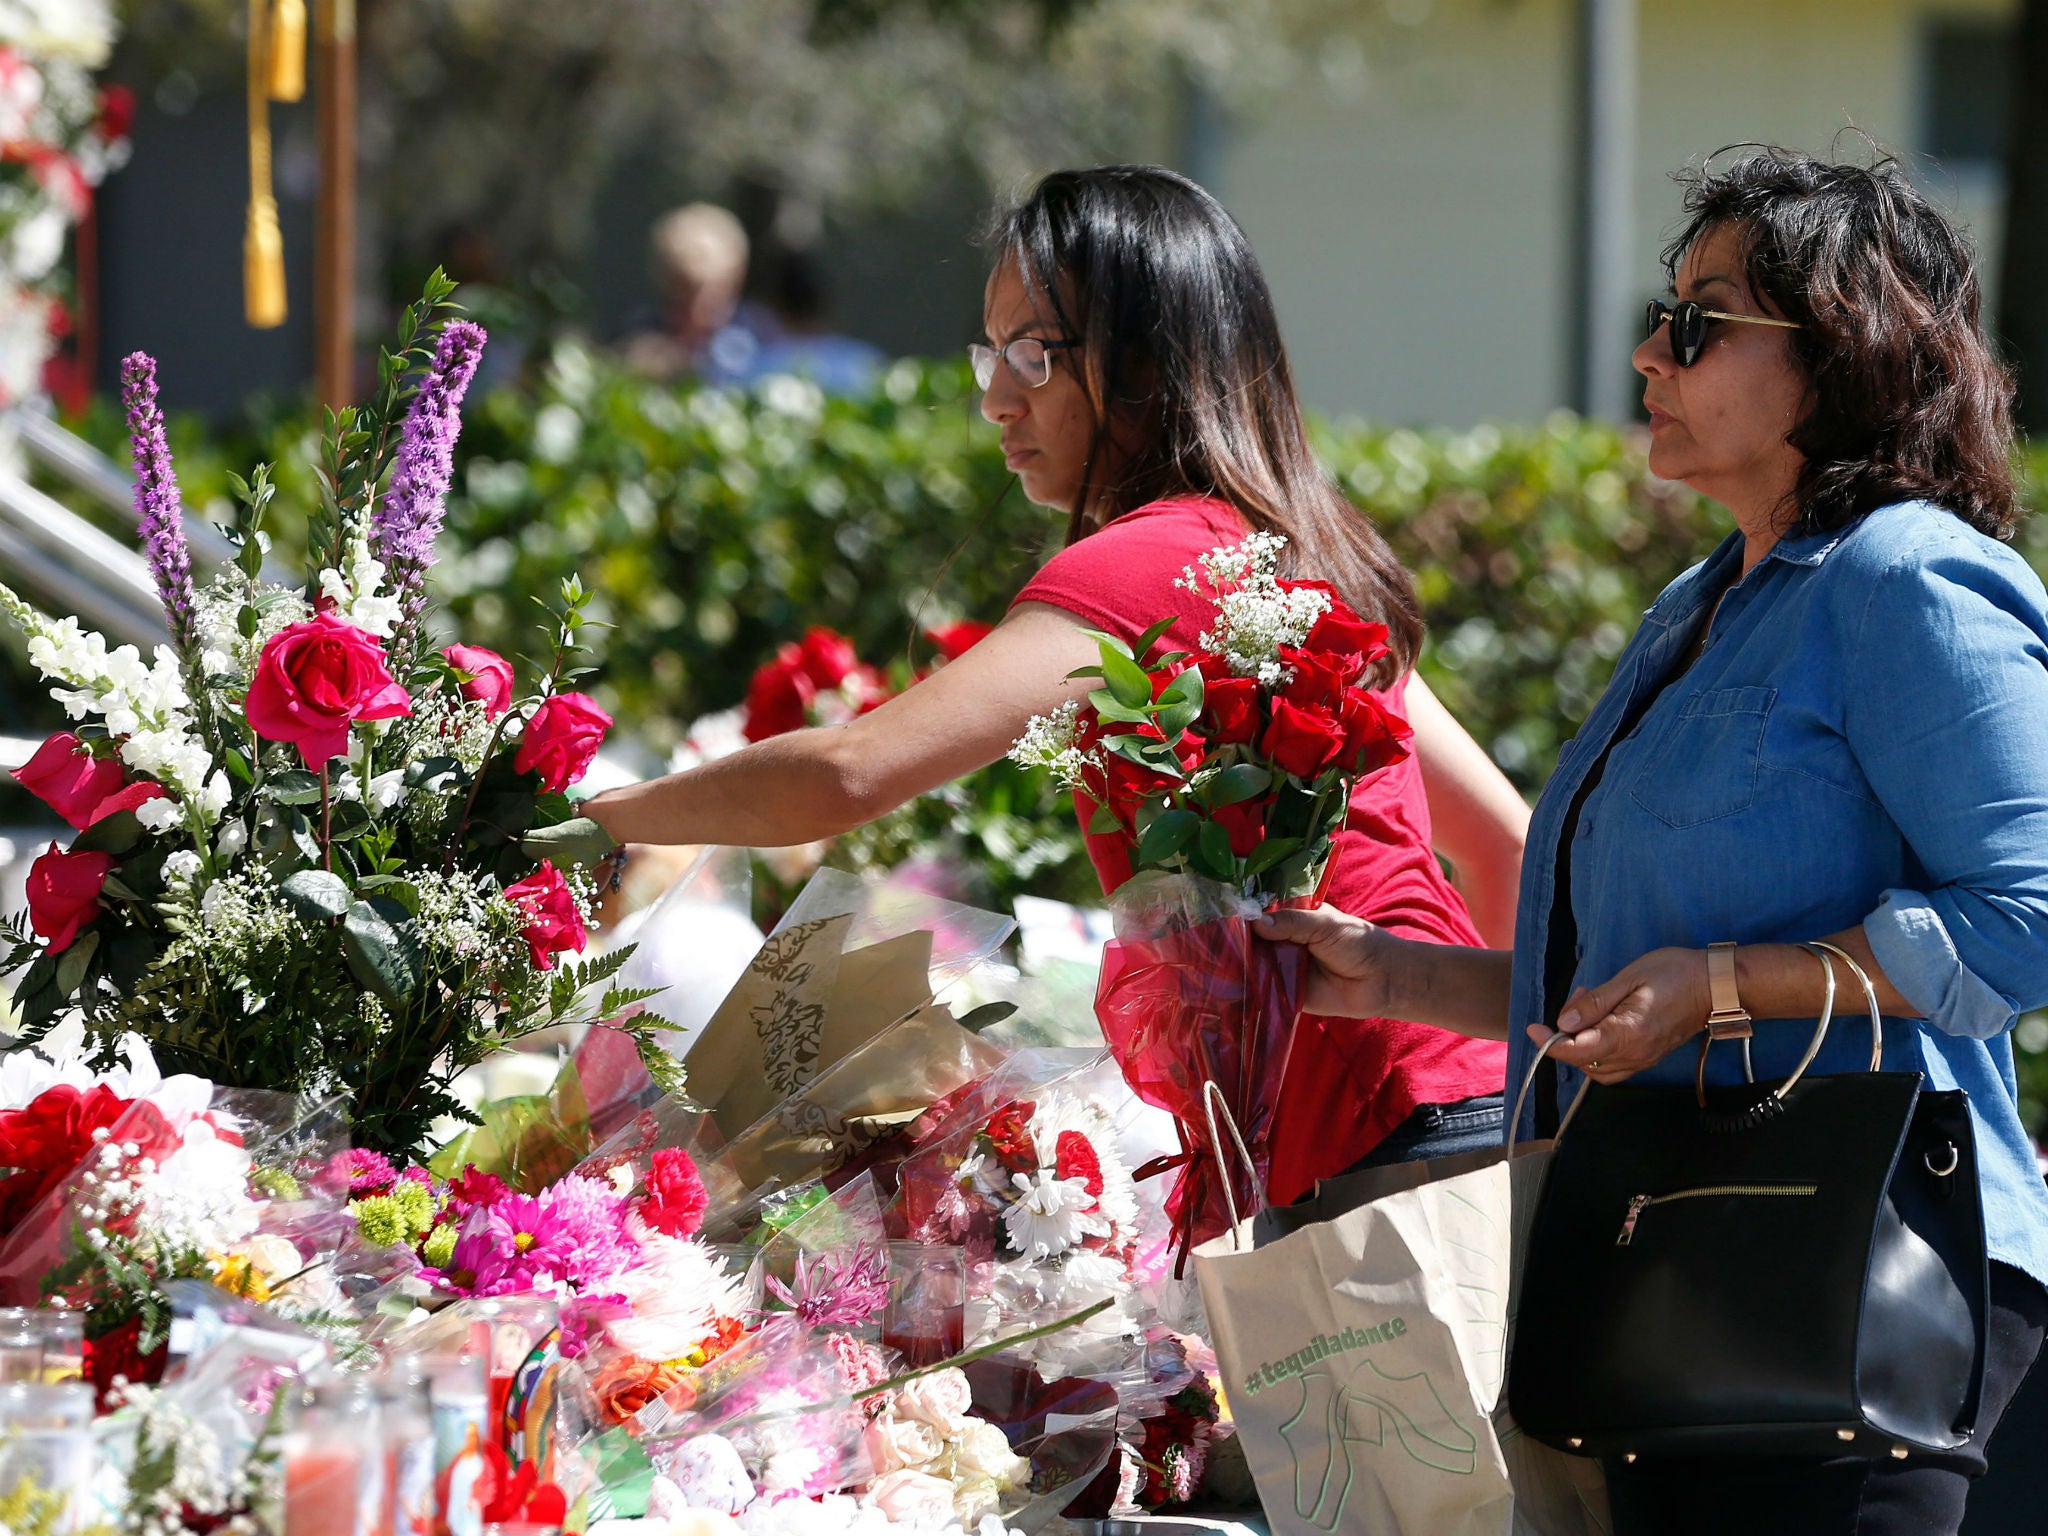 Mourners place flowers on a memorial for the victims of the Marjory Stoneman Douglas High School shooting in a park in Parklan